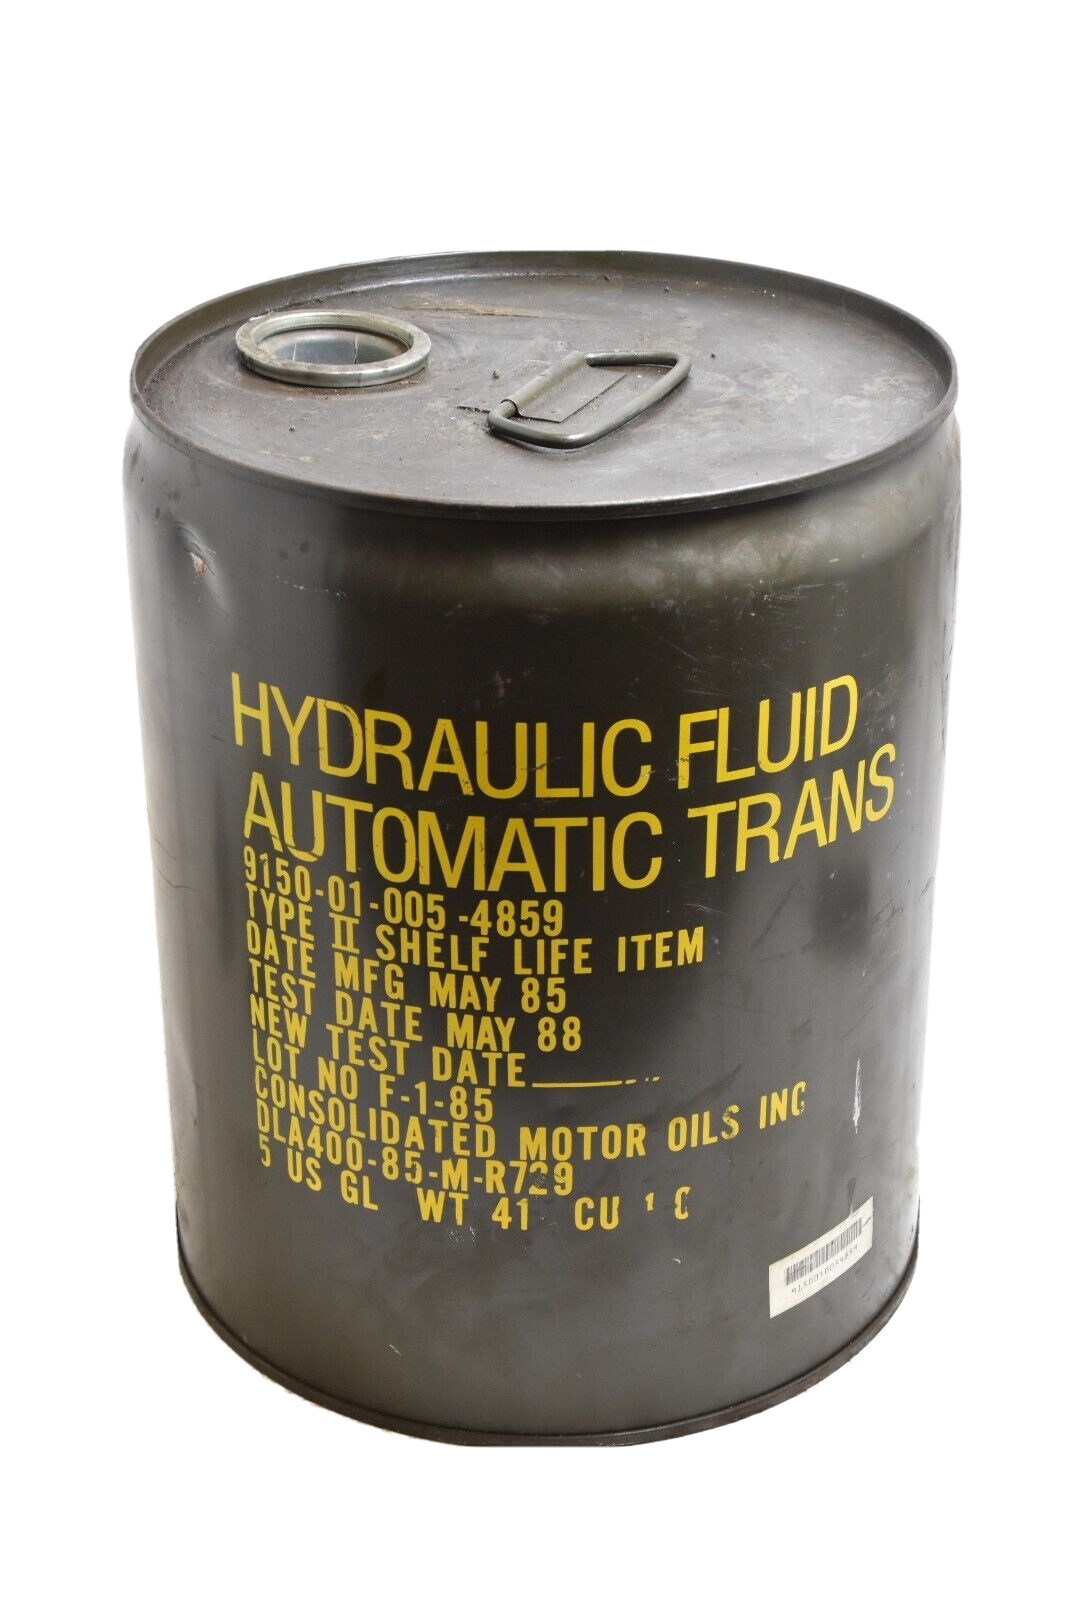 VINTAGE CONSOLIDATED MOTOR OILS INC. HYDRAULIC FLUID AUTO TRANS CAN. 5 GAL, 1985